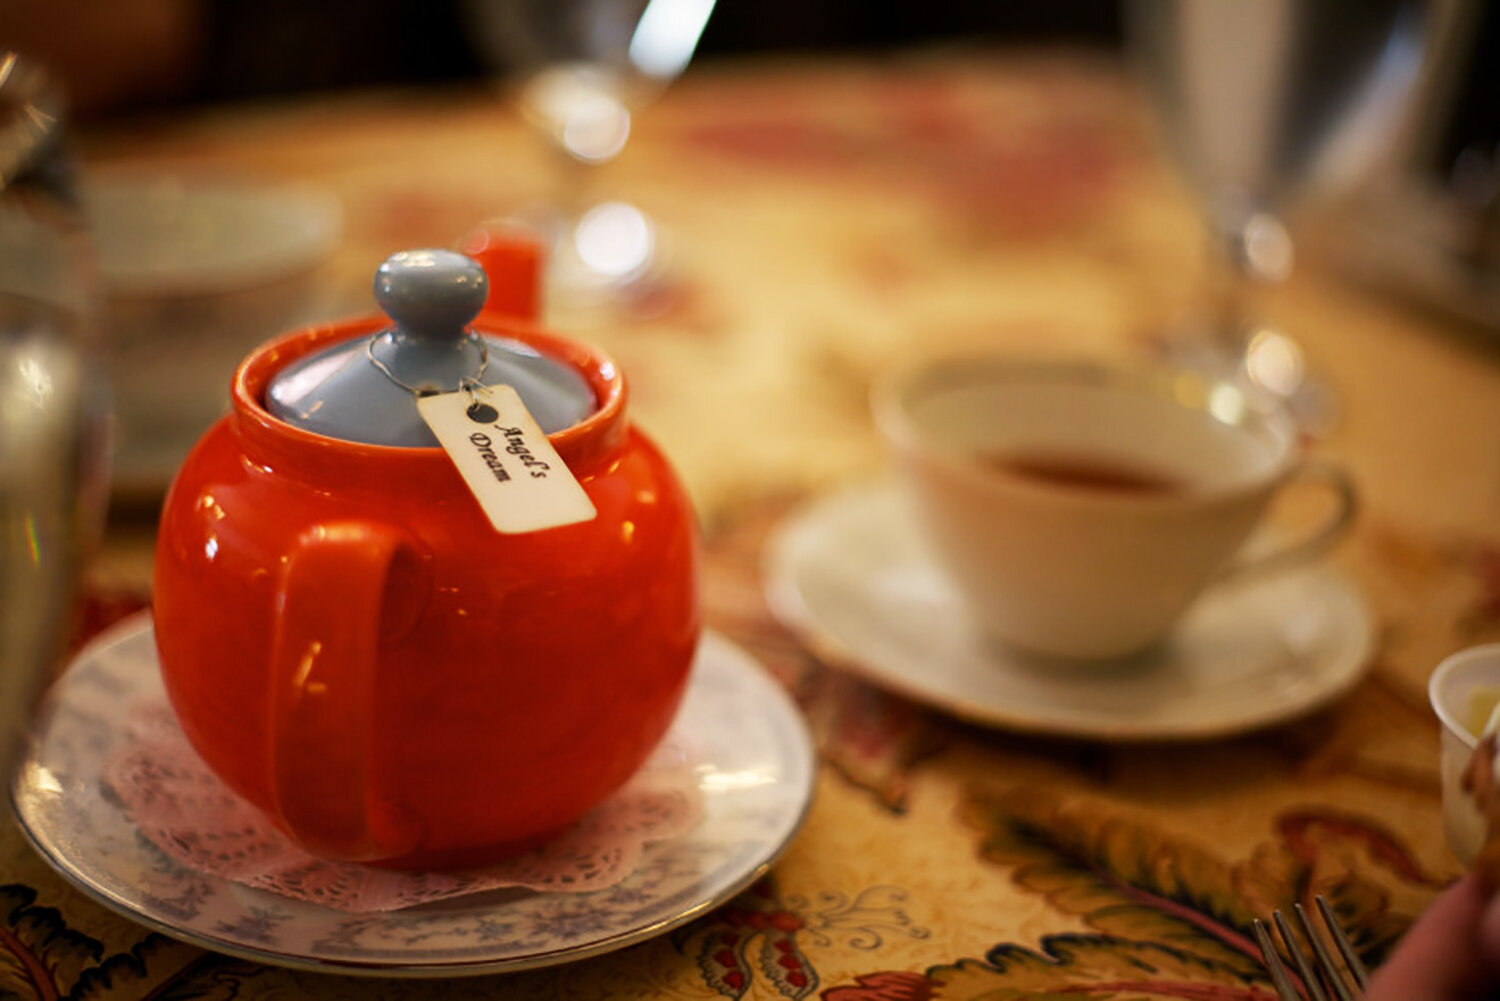  Angel's Dream black tea served in a colorful teapot. 